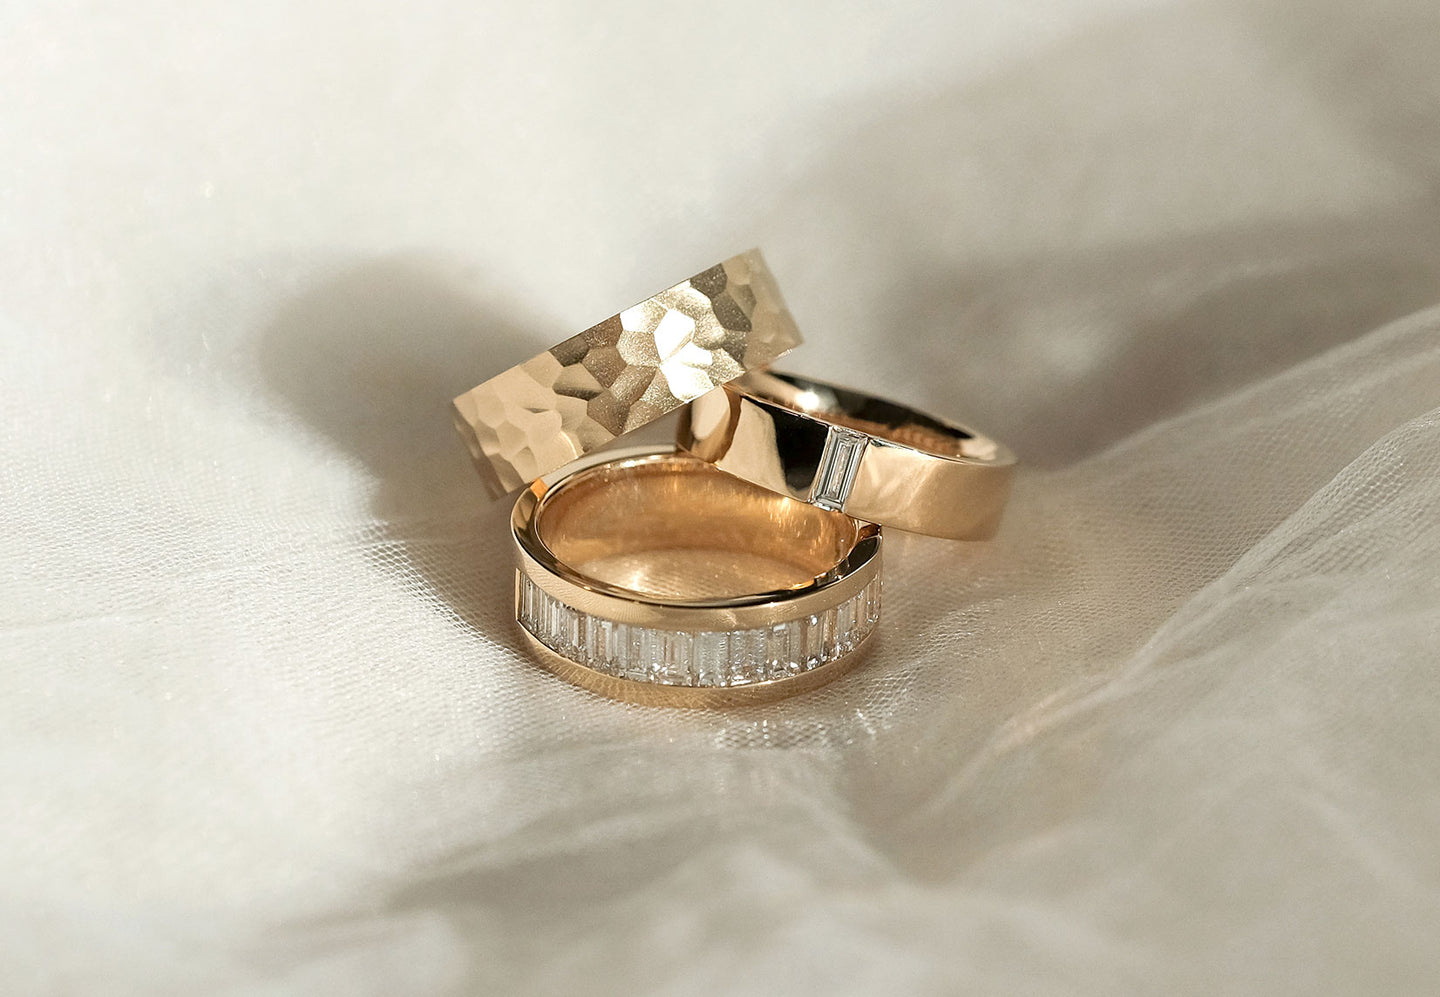 The Hammered, The Flush Baguette, and The Channel Baguette rings from Holden, all in yellow gold.